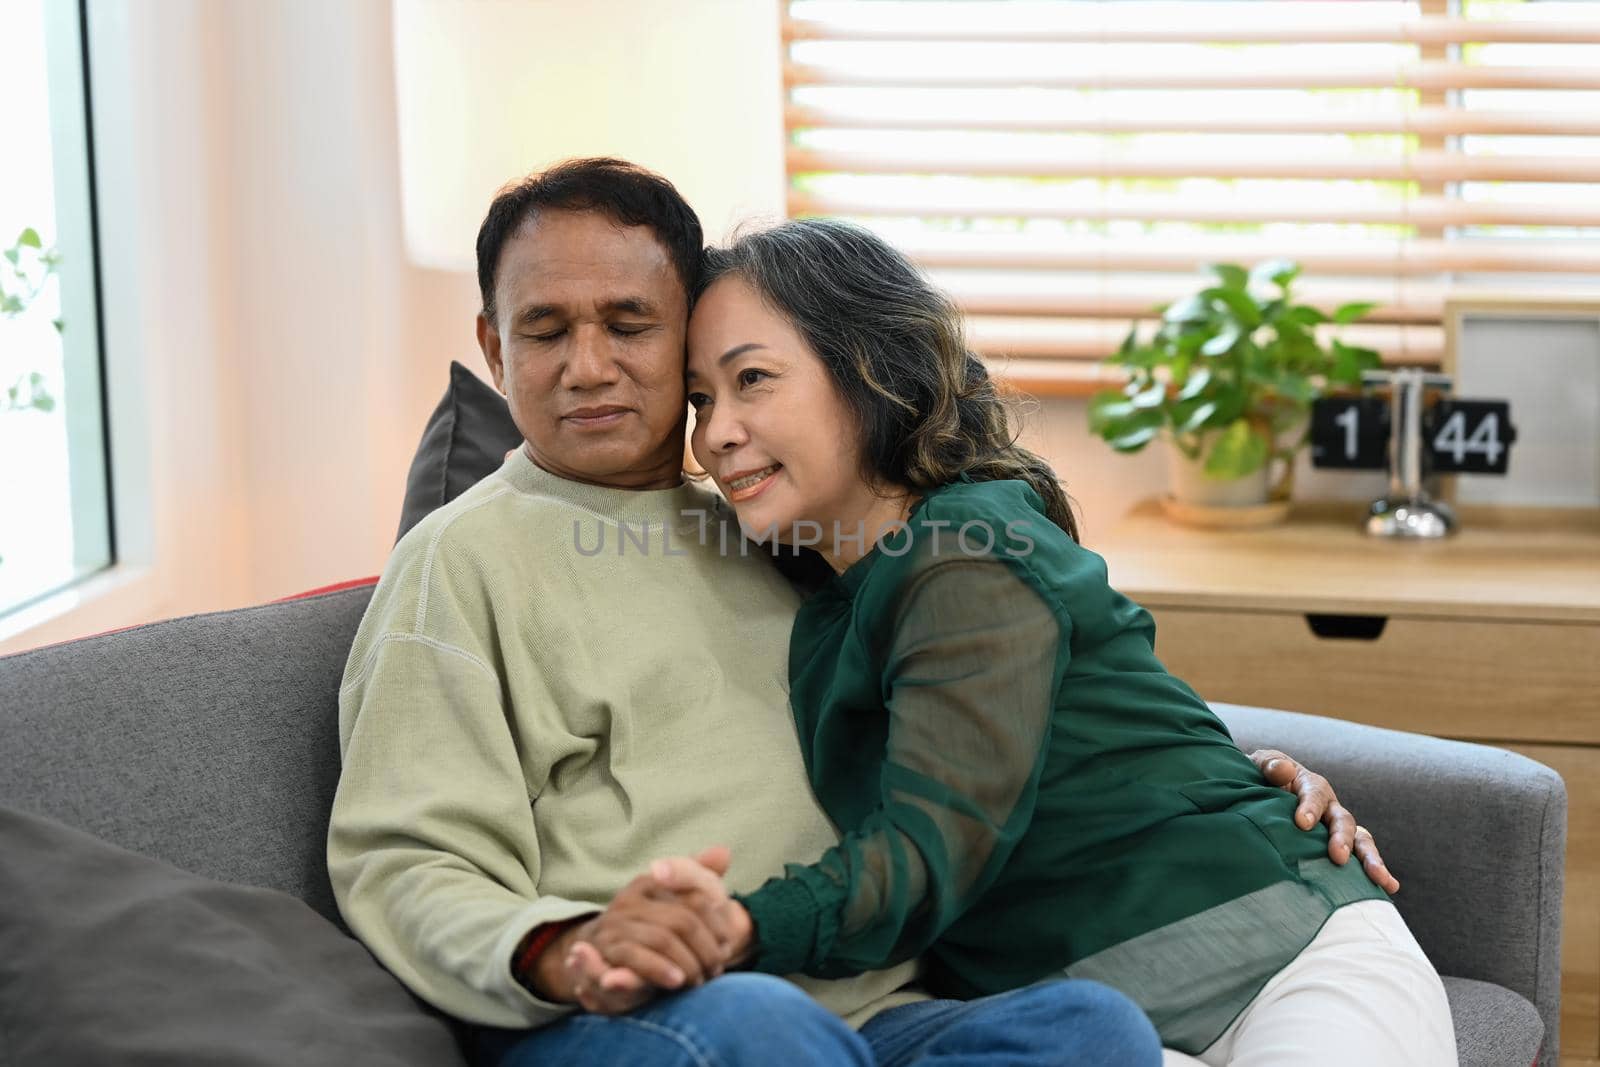 Smiling senior couple holding hands while sitting together comfortable couch. Retirement lifestyle, health insurance concept.